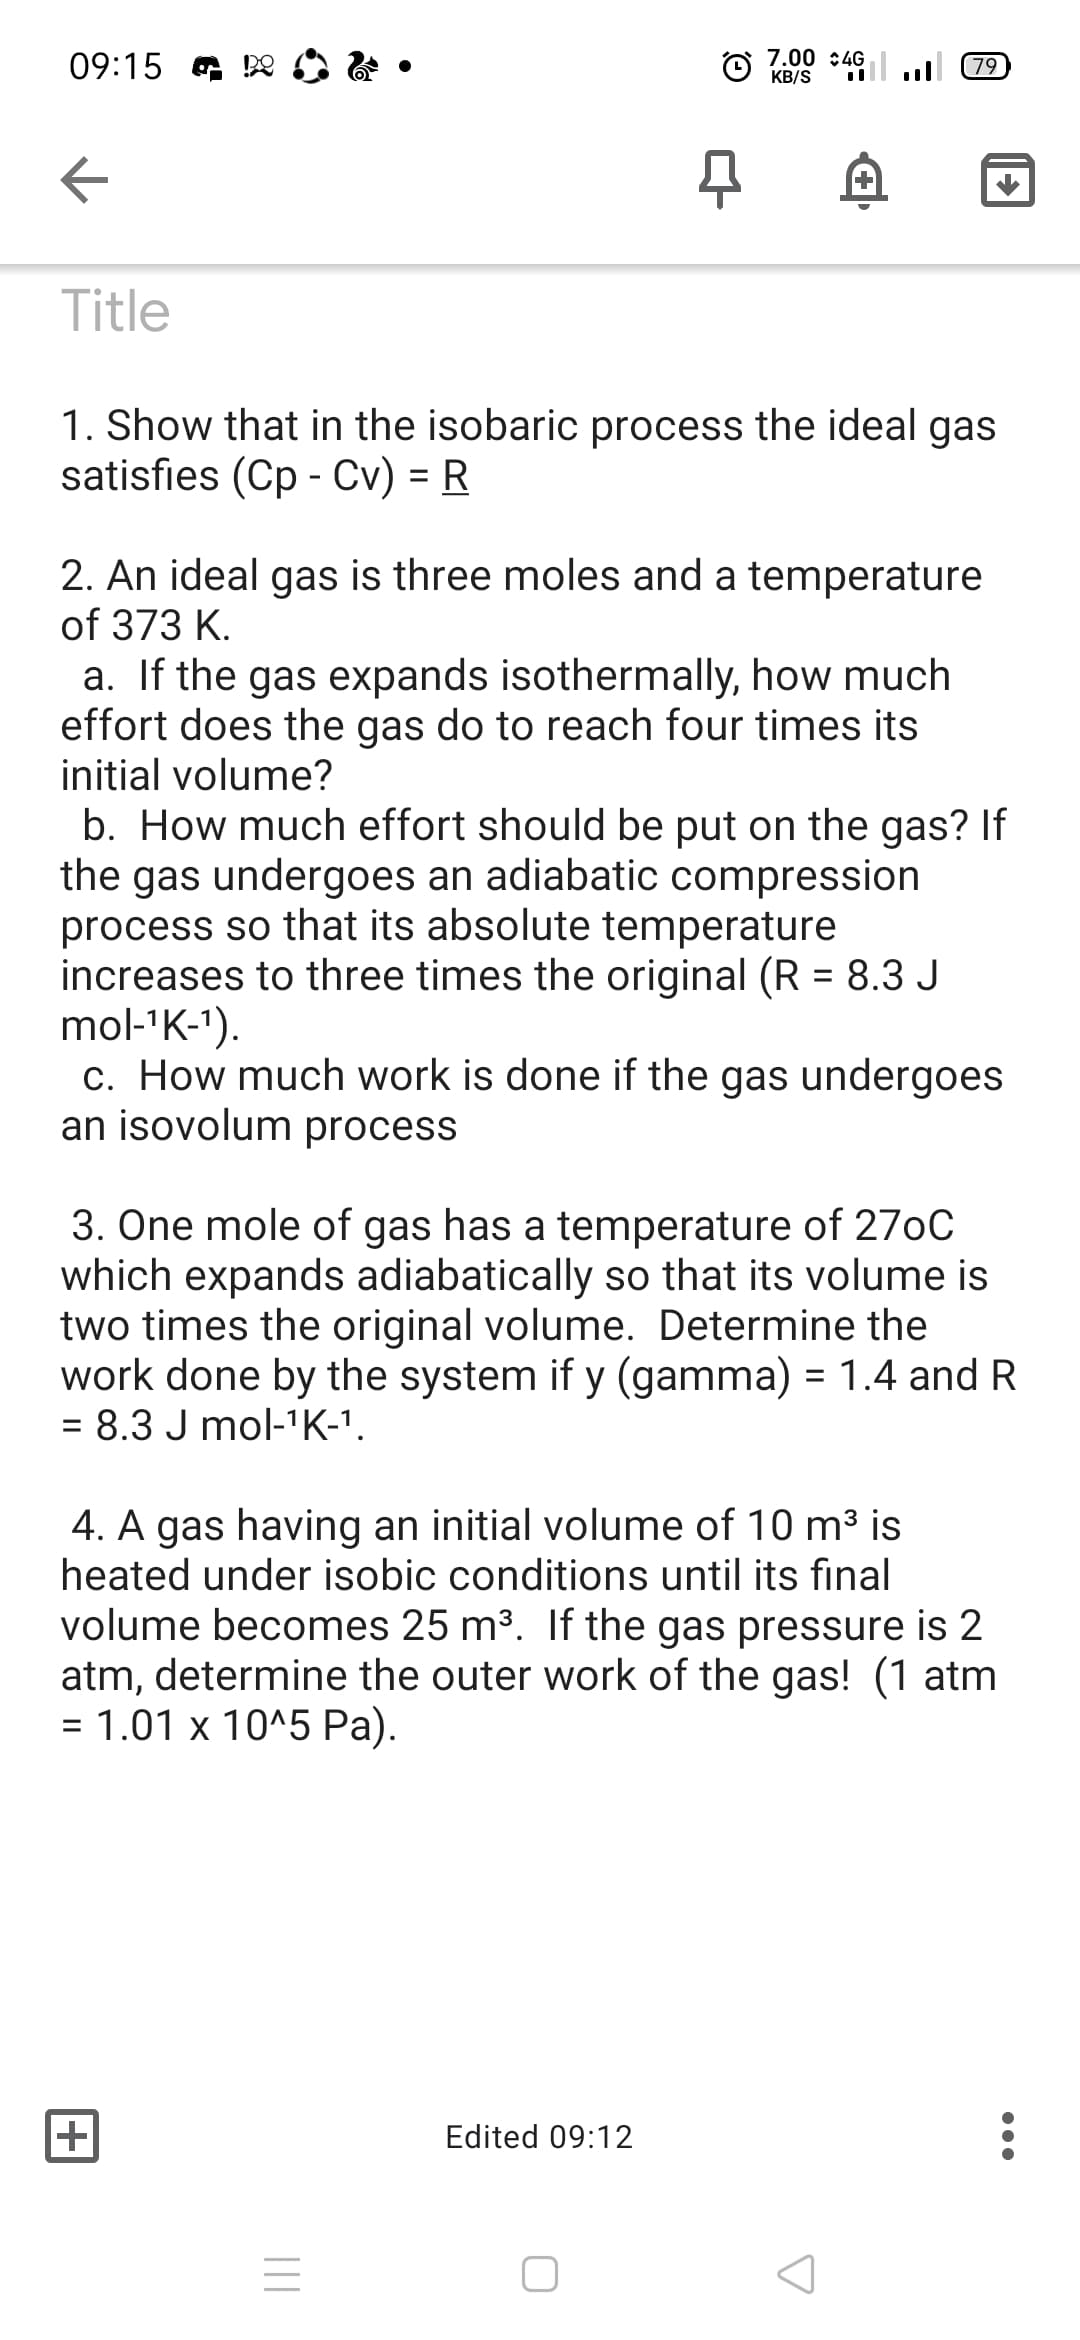 09:15 a De
7.00 :4G
KB/S
u 79
Title
1. Show that in the isobaric process the ideal gas
satisfies (Cp - Cv) = R
%3D
2. An ideal gas is three moles and a temperature
of 373 K.
a. If the gas expands isothermally, how much
effort does the gas do to reach four times its
initial volume?
b. How much effort should be put on the gas? If
the gas undergoes an adiabatic compression
process so that its absolute temperature
increases to three times the original (R = 8.3 J
mol-'K-1).
c. How much work is done if the gas undergoes
an isovolum process
%3D
3. One mole of gas has a temperature of 270C
which expands adiabatically so that its volume is
two times the original volume. Determine the
work done by the system if y (gamma) = 1.4 and R
= 8.3 J mol-1K-1.
4. A gas having an initial volume of 10 m³ is
heated under isobic conditions until its final
volume becomes 25 m3. If the gas pressure is 2
atm, determine the outer work of the gas! (1 atm
= 1.01 x 10^5 Pa).
+
Edited 09:12
